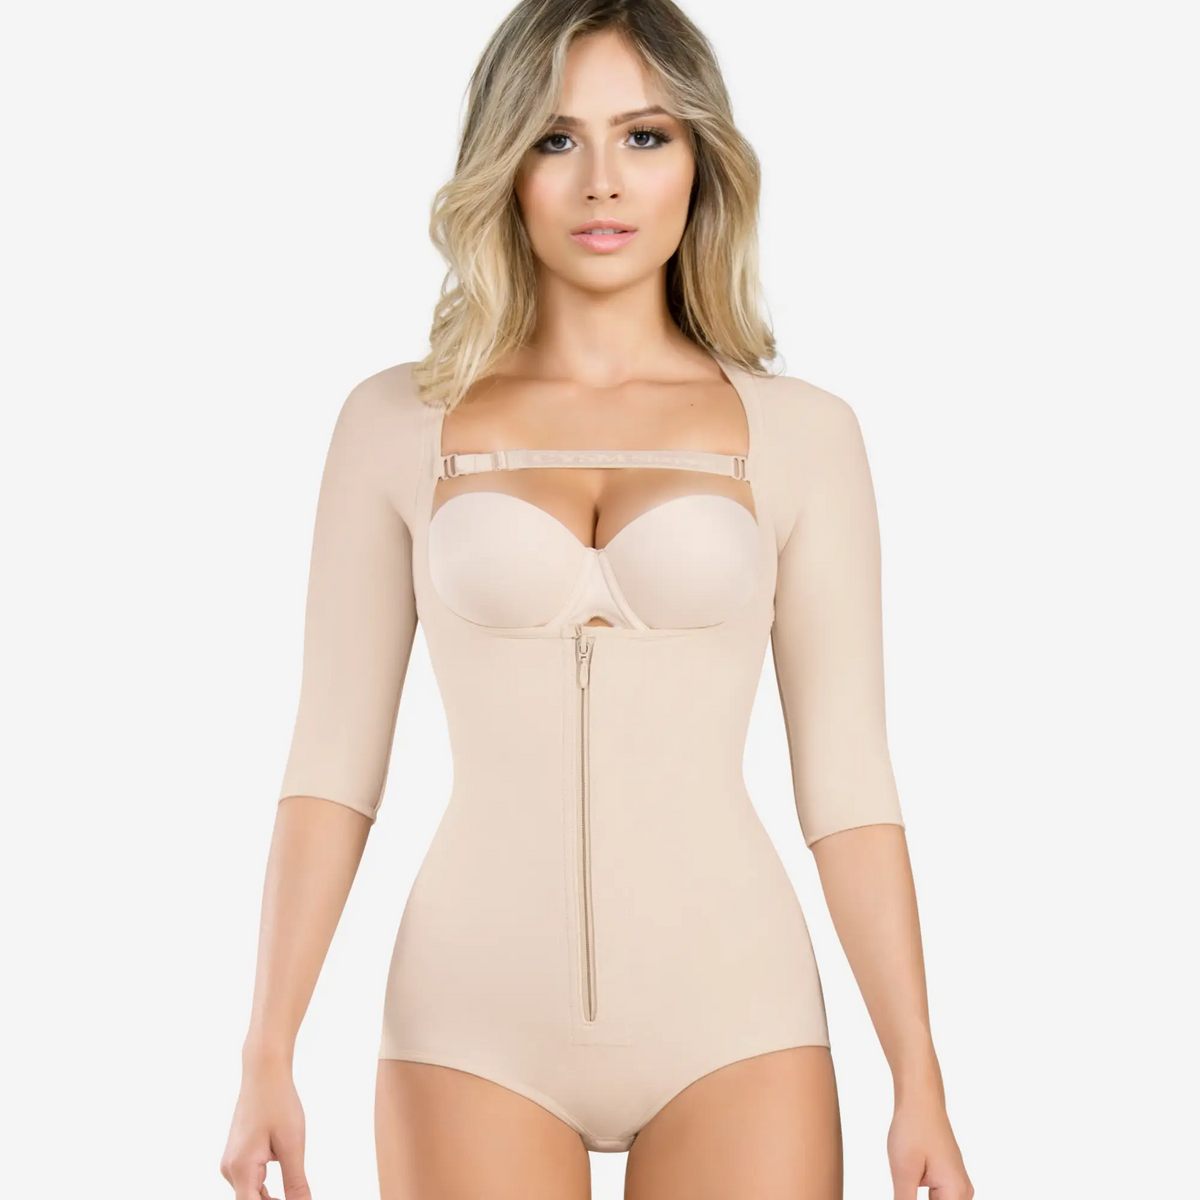 Cysm Top To Bottom Arms and Legs Full Body Shaper